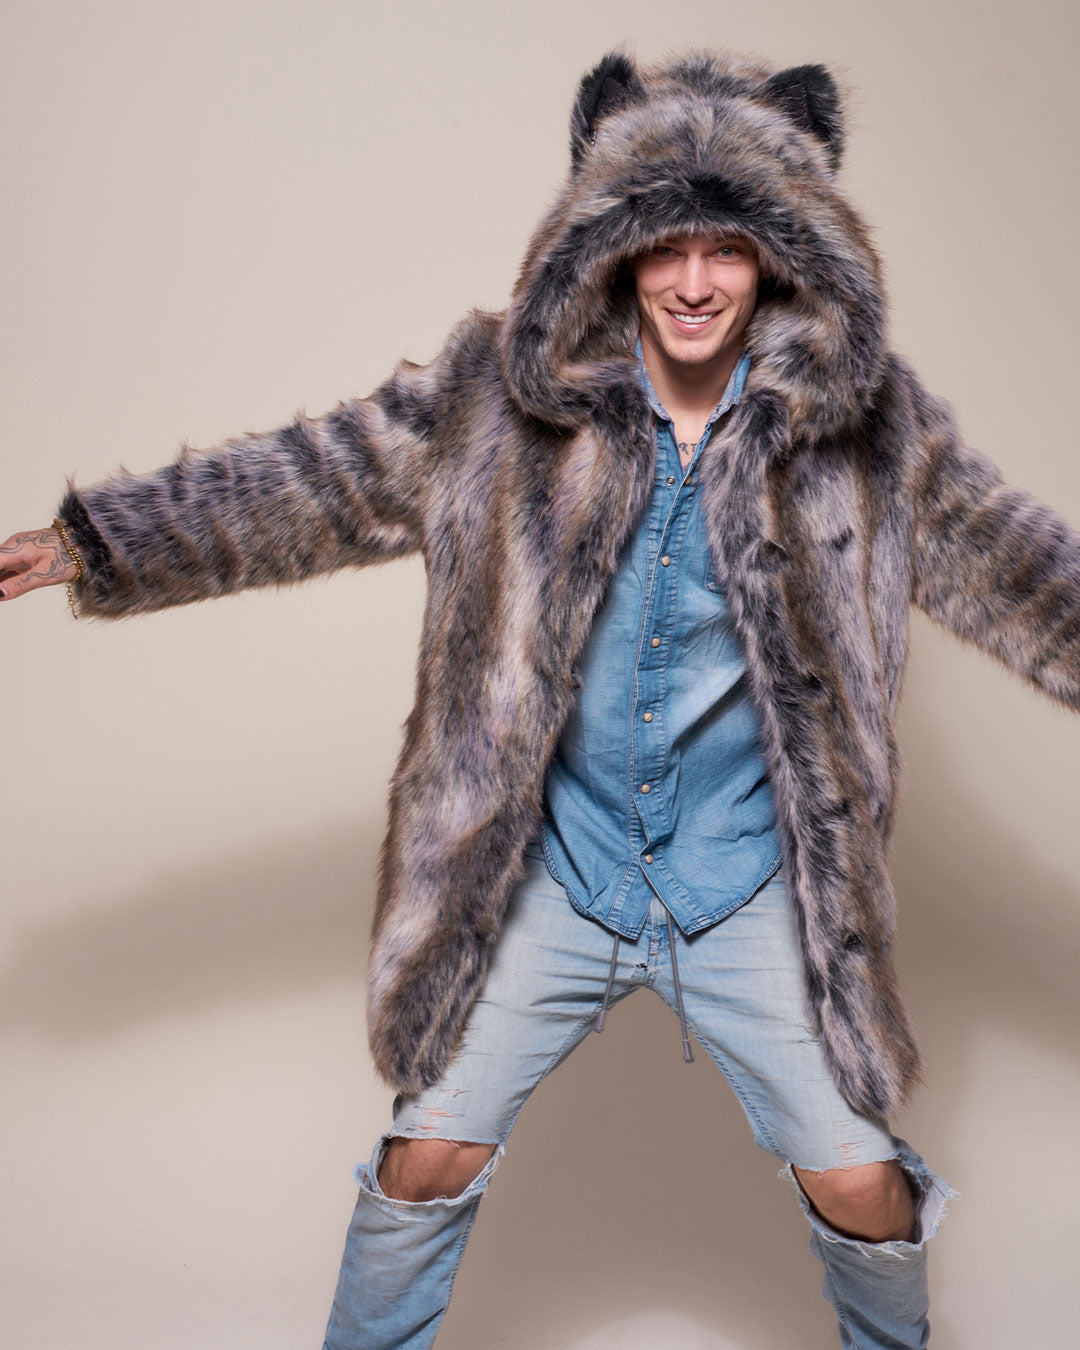 Men In Fur: A Do Or A Don't?